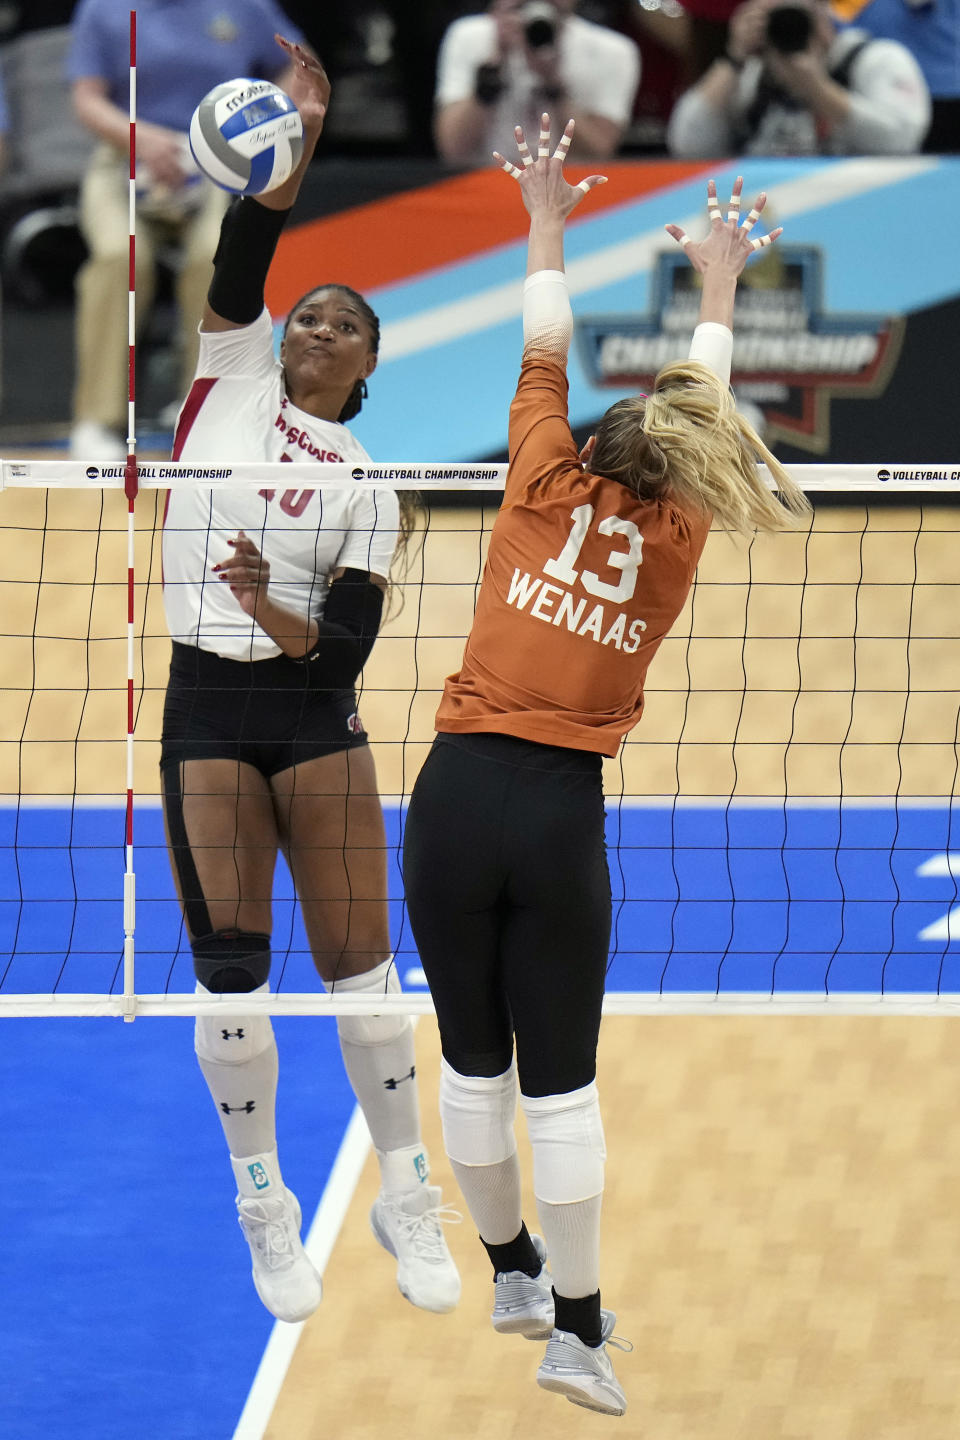 Wisconsin's Devyn Robinson (10) scores over Texas's Jenna Wenaas (13) during a semifinal match in the NCAA Division I women's college volleyball tournament Thursday, Dec. 14, 2023, in Tampa, Fla. (AP Photo/Chris O'Meara)